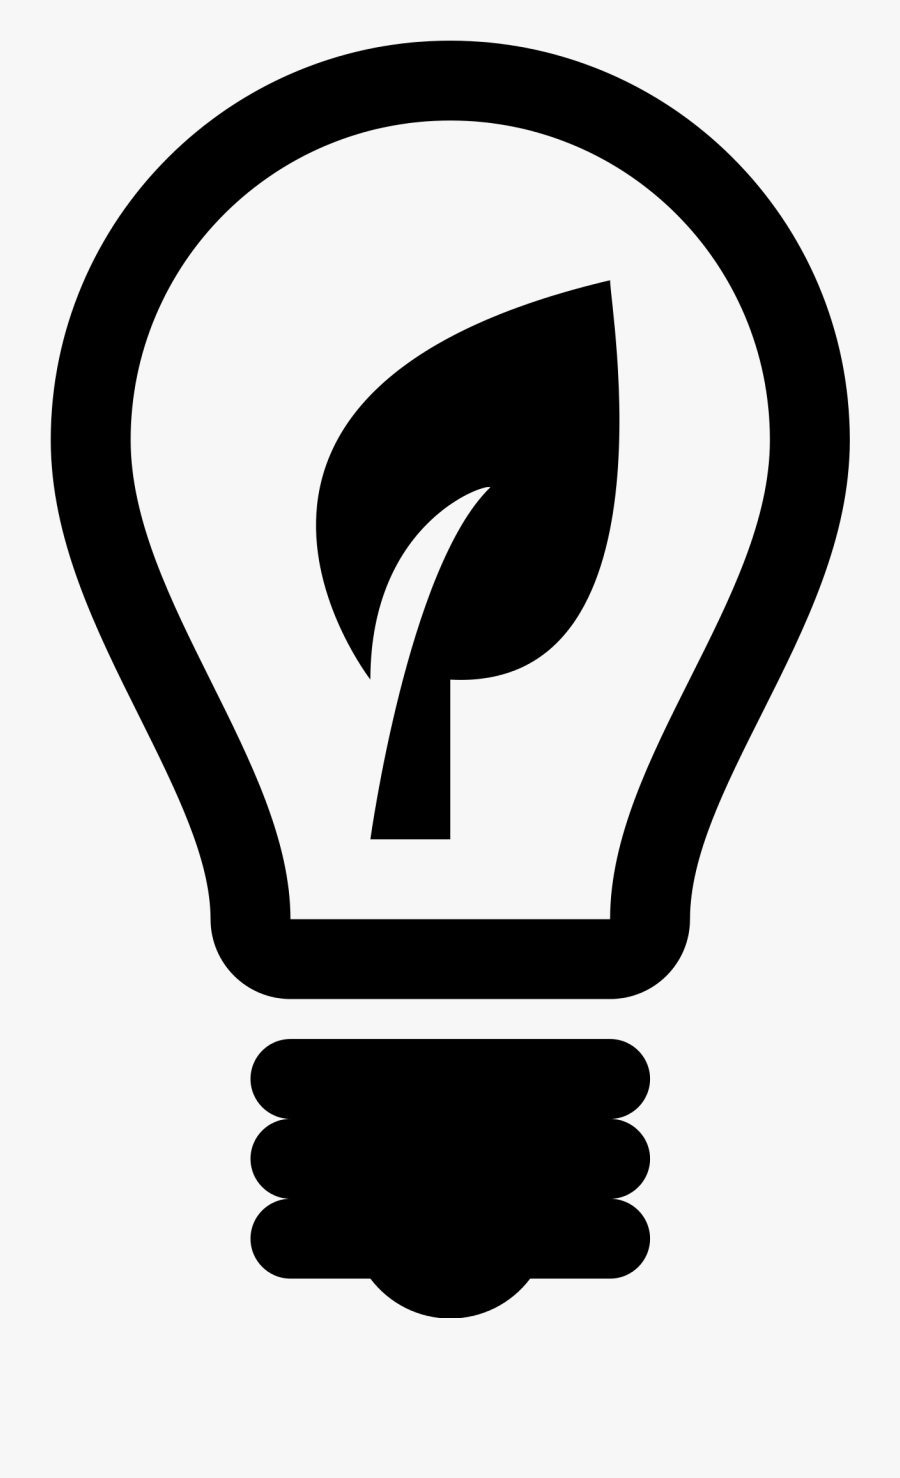 Energy Black And White - Renewable Energy Icon Png, Transparent Clipart